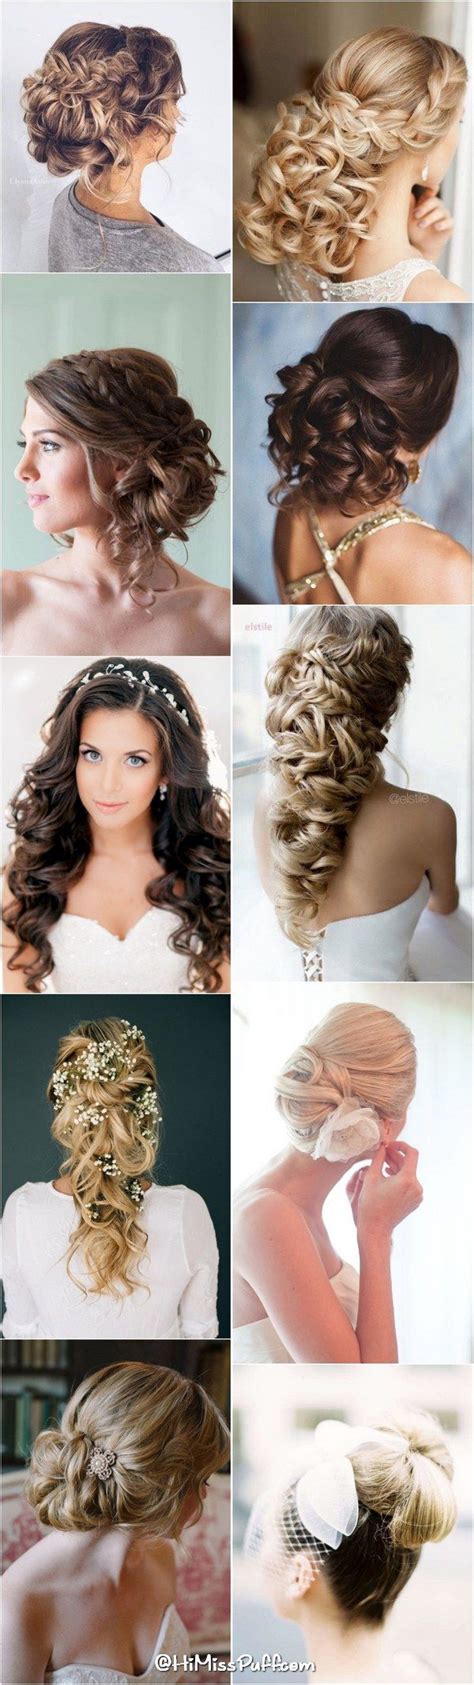 250 Bridal Wedding Hairstyles For Long Hair That Will Inspire Hair